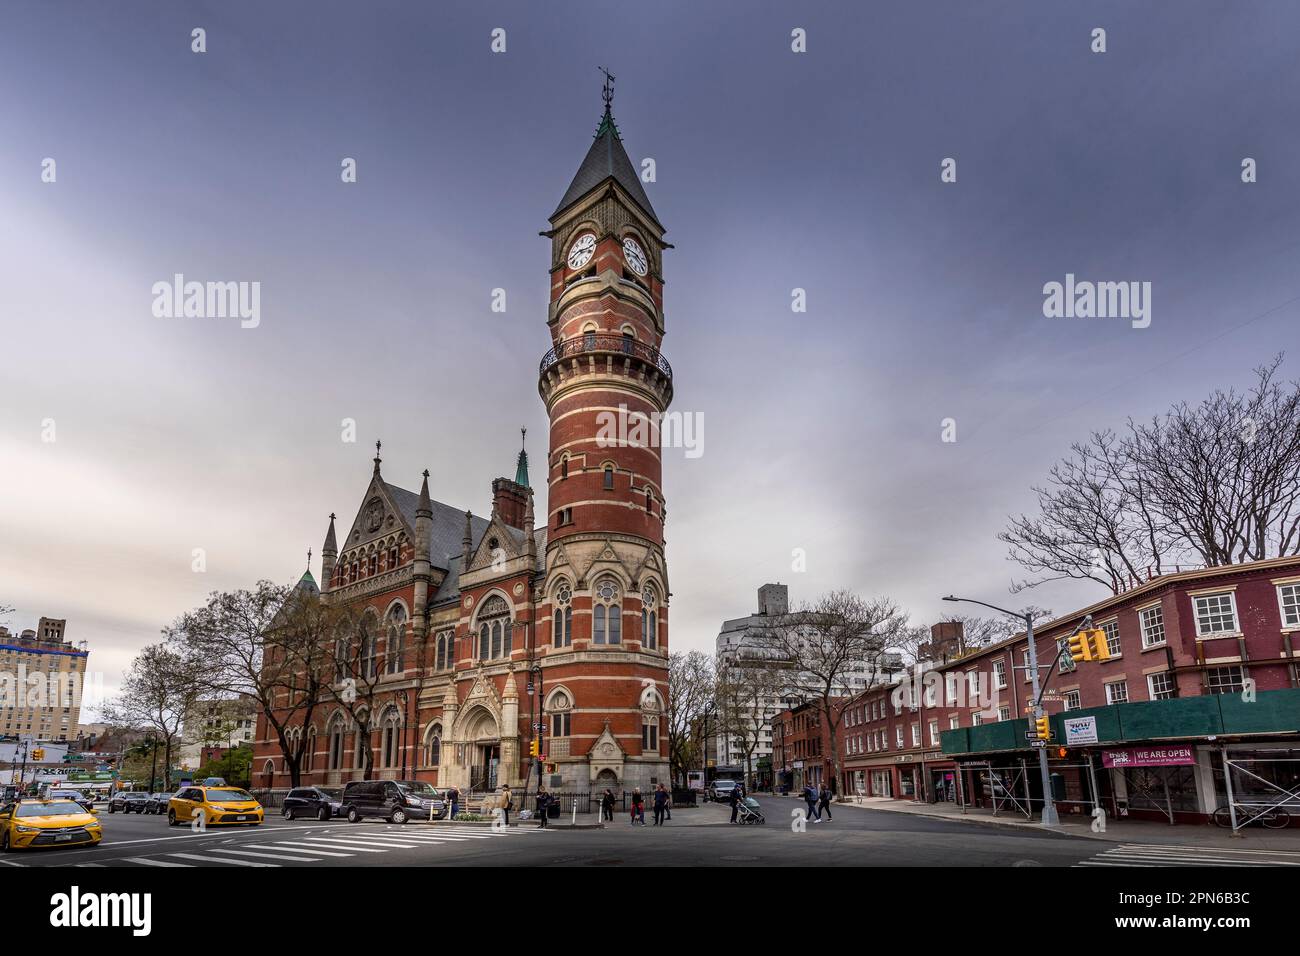 New York, USA - April 25, 2022: Jefferson Market Library in New York. The Jefferson Market Library is a landmark located in Greenwich Village, New Yor Stock Photo